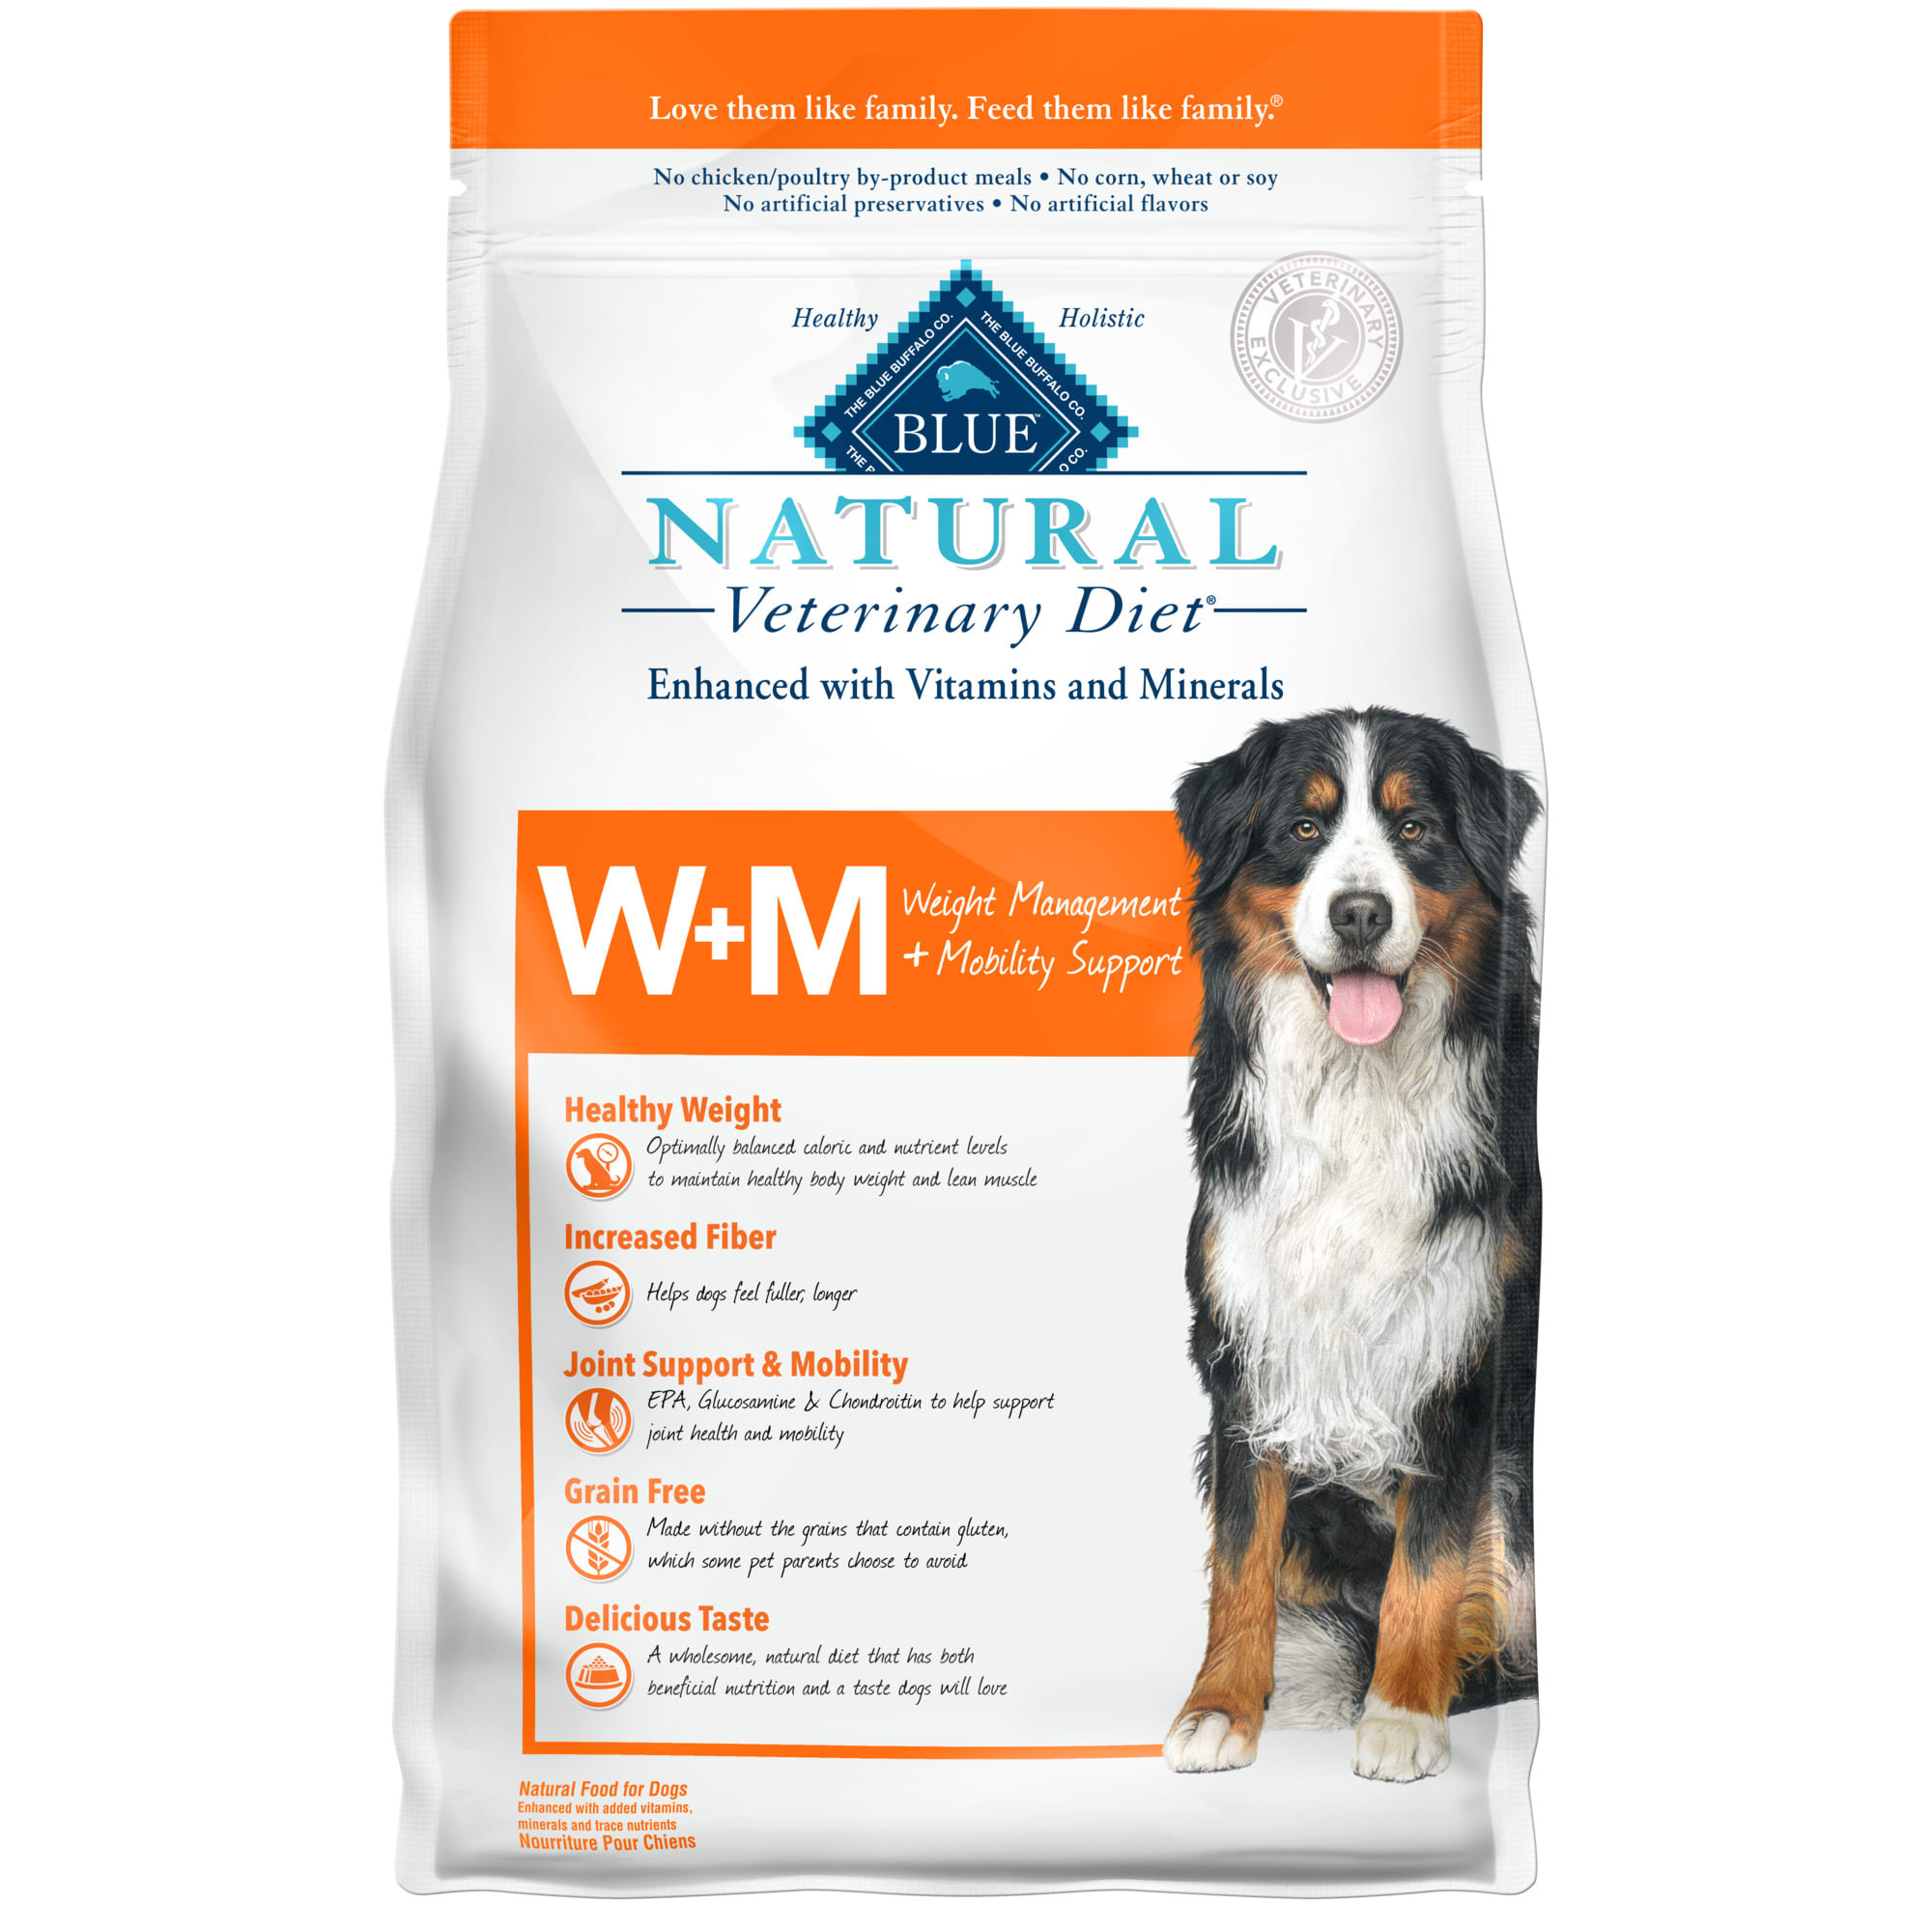 Blue Buffalo Natural Veterinary Diet W+M Weight Management + Mobility Support Salmon Dry Dog Food, 6 lbs.